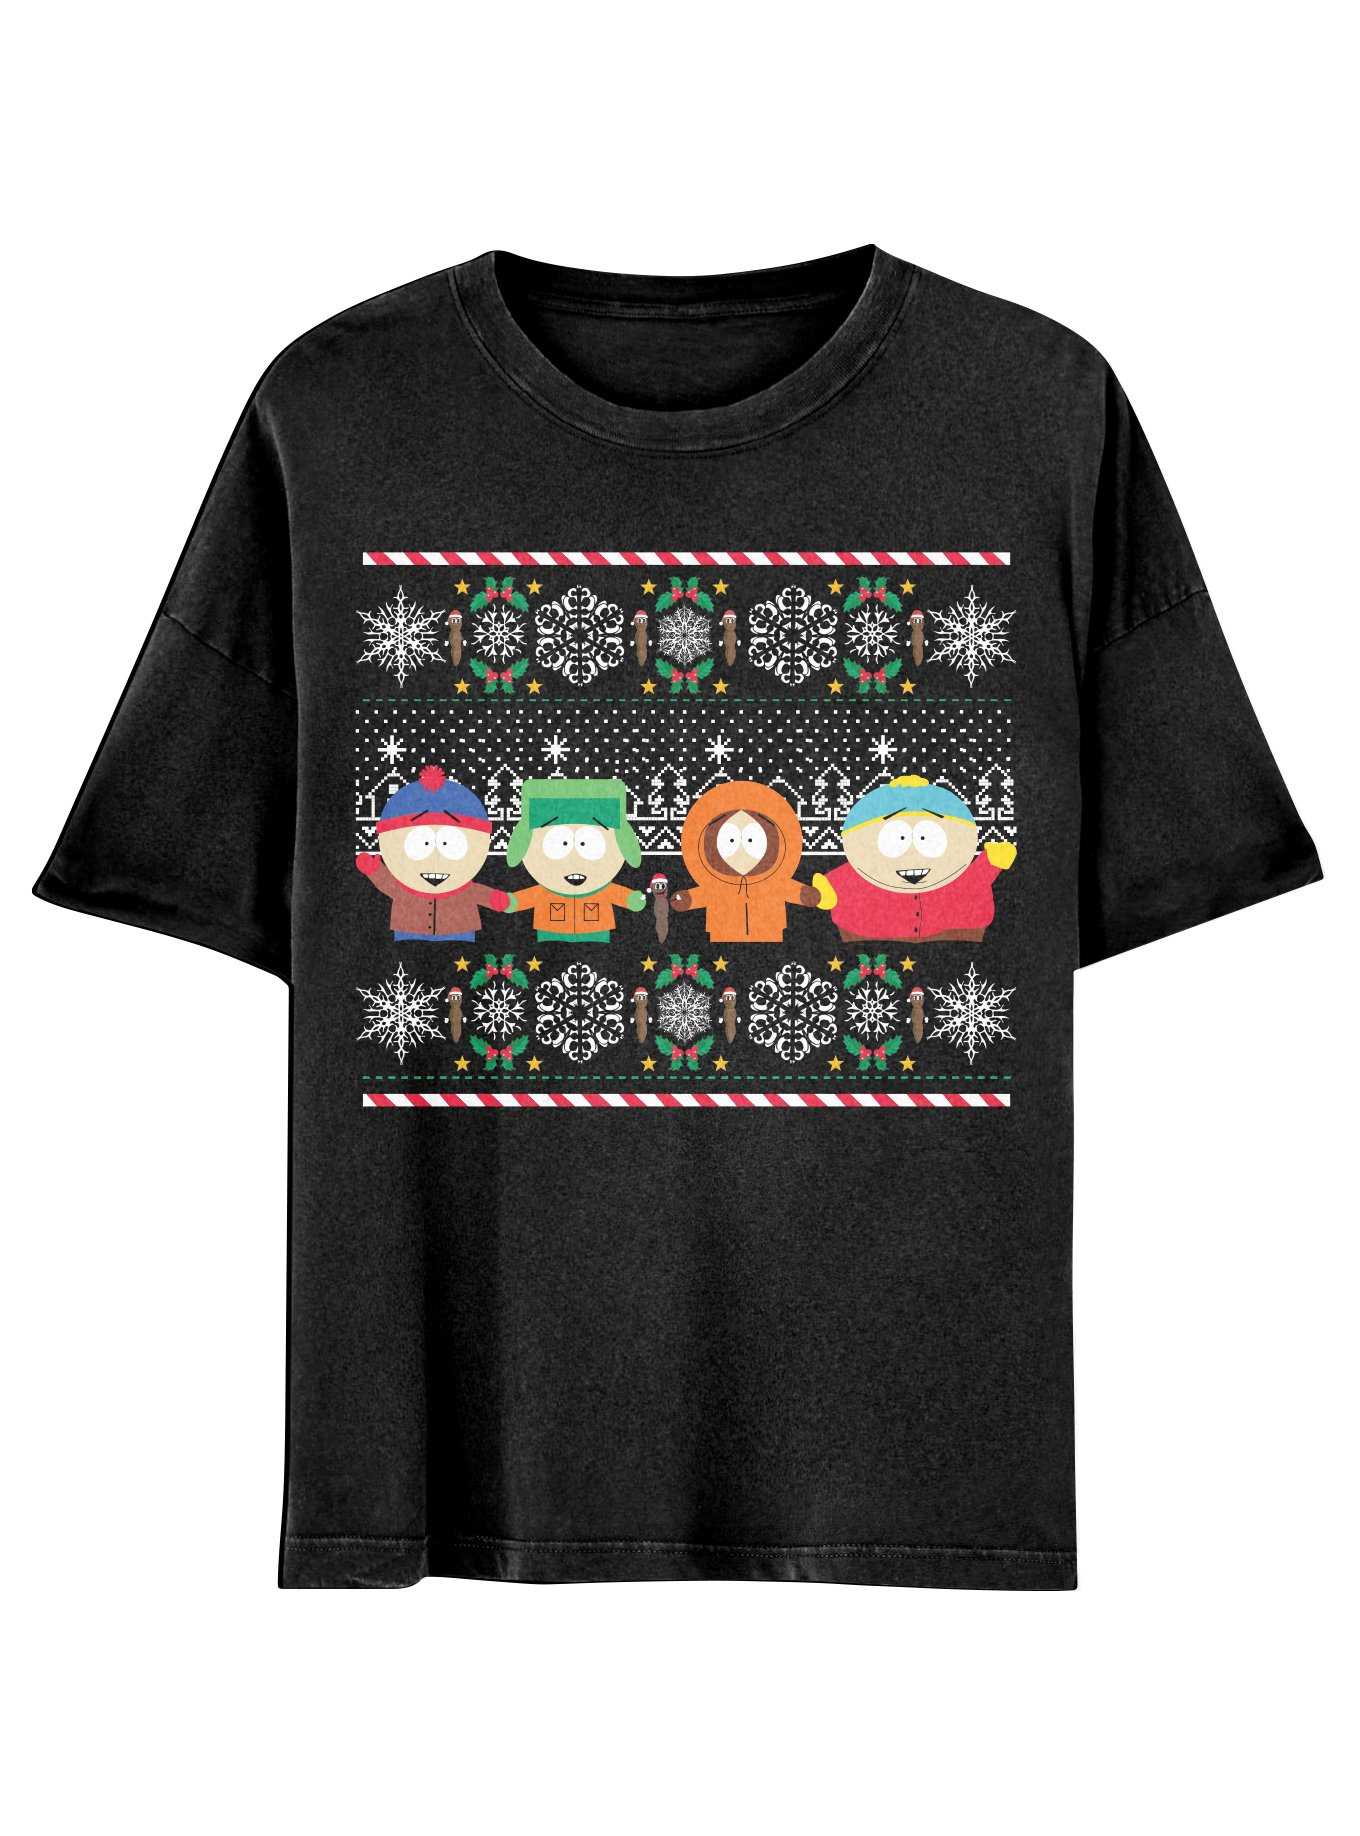 South Park Group Holiday Boyfriend Fit Girls T-Shirt, , hi-res